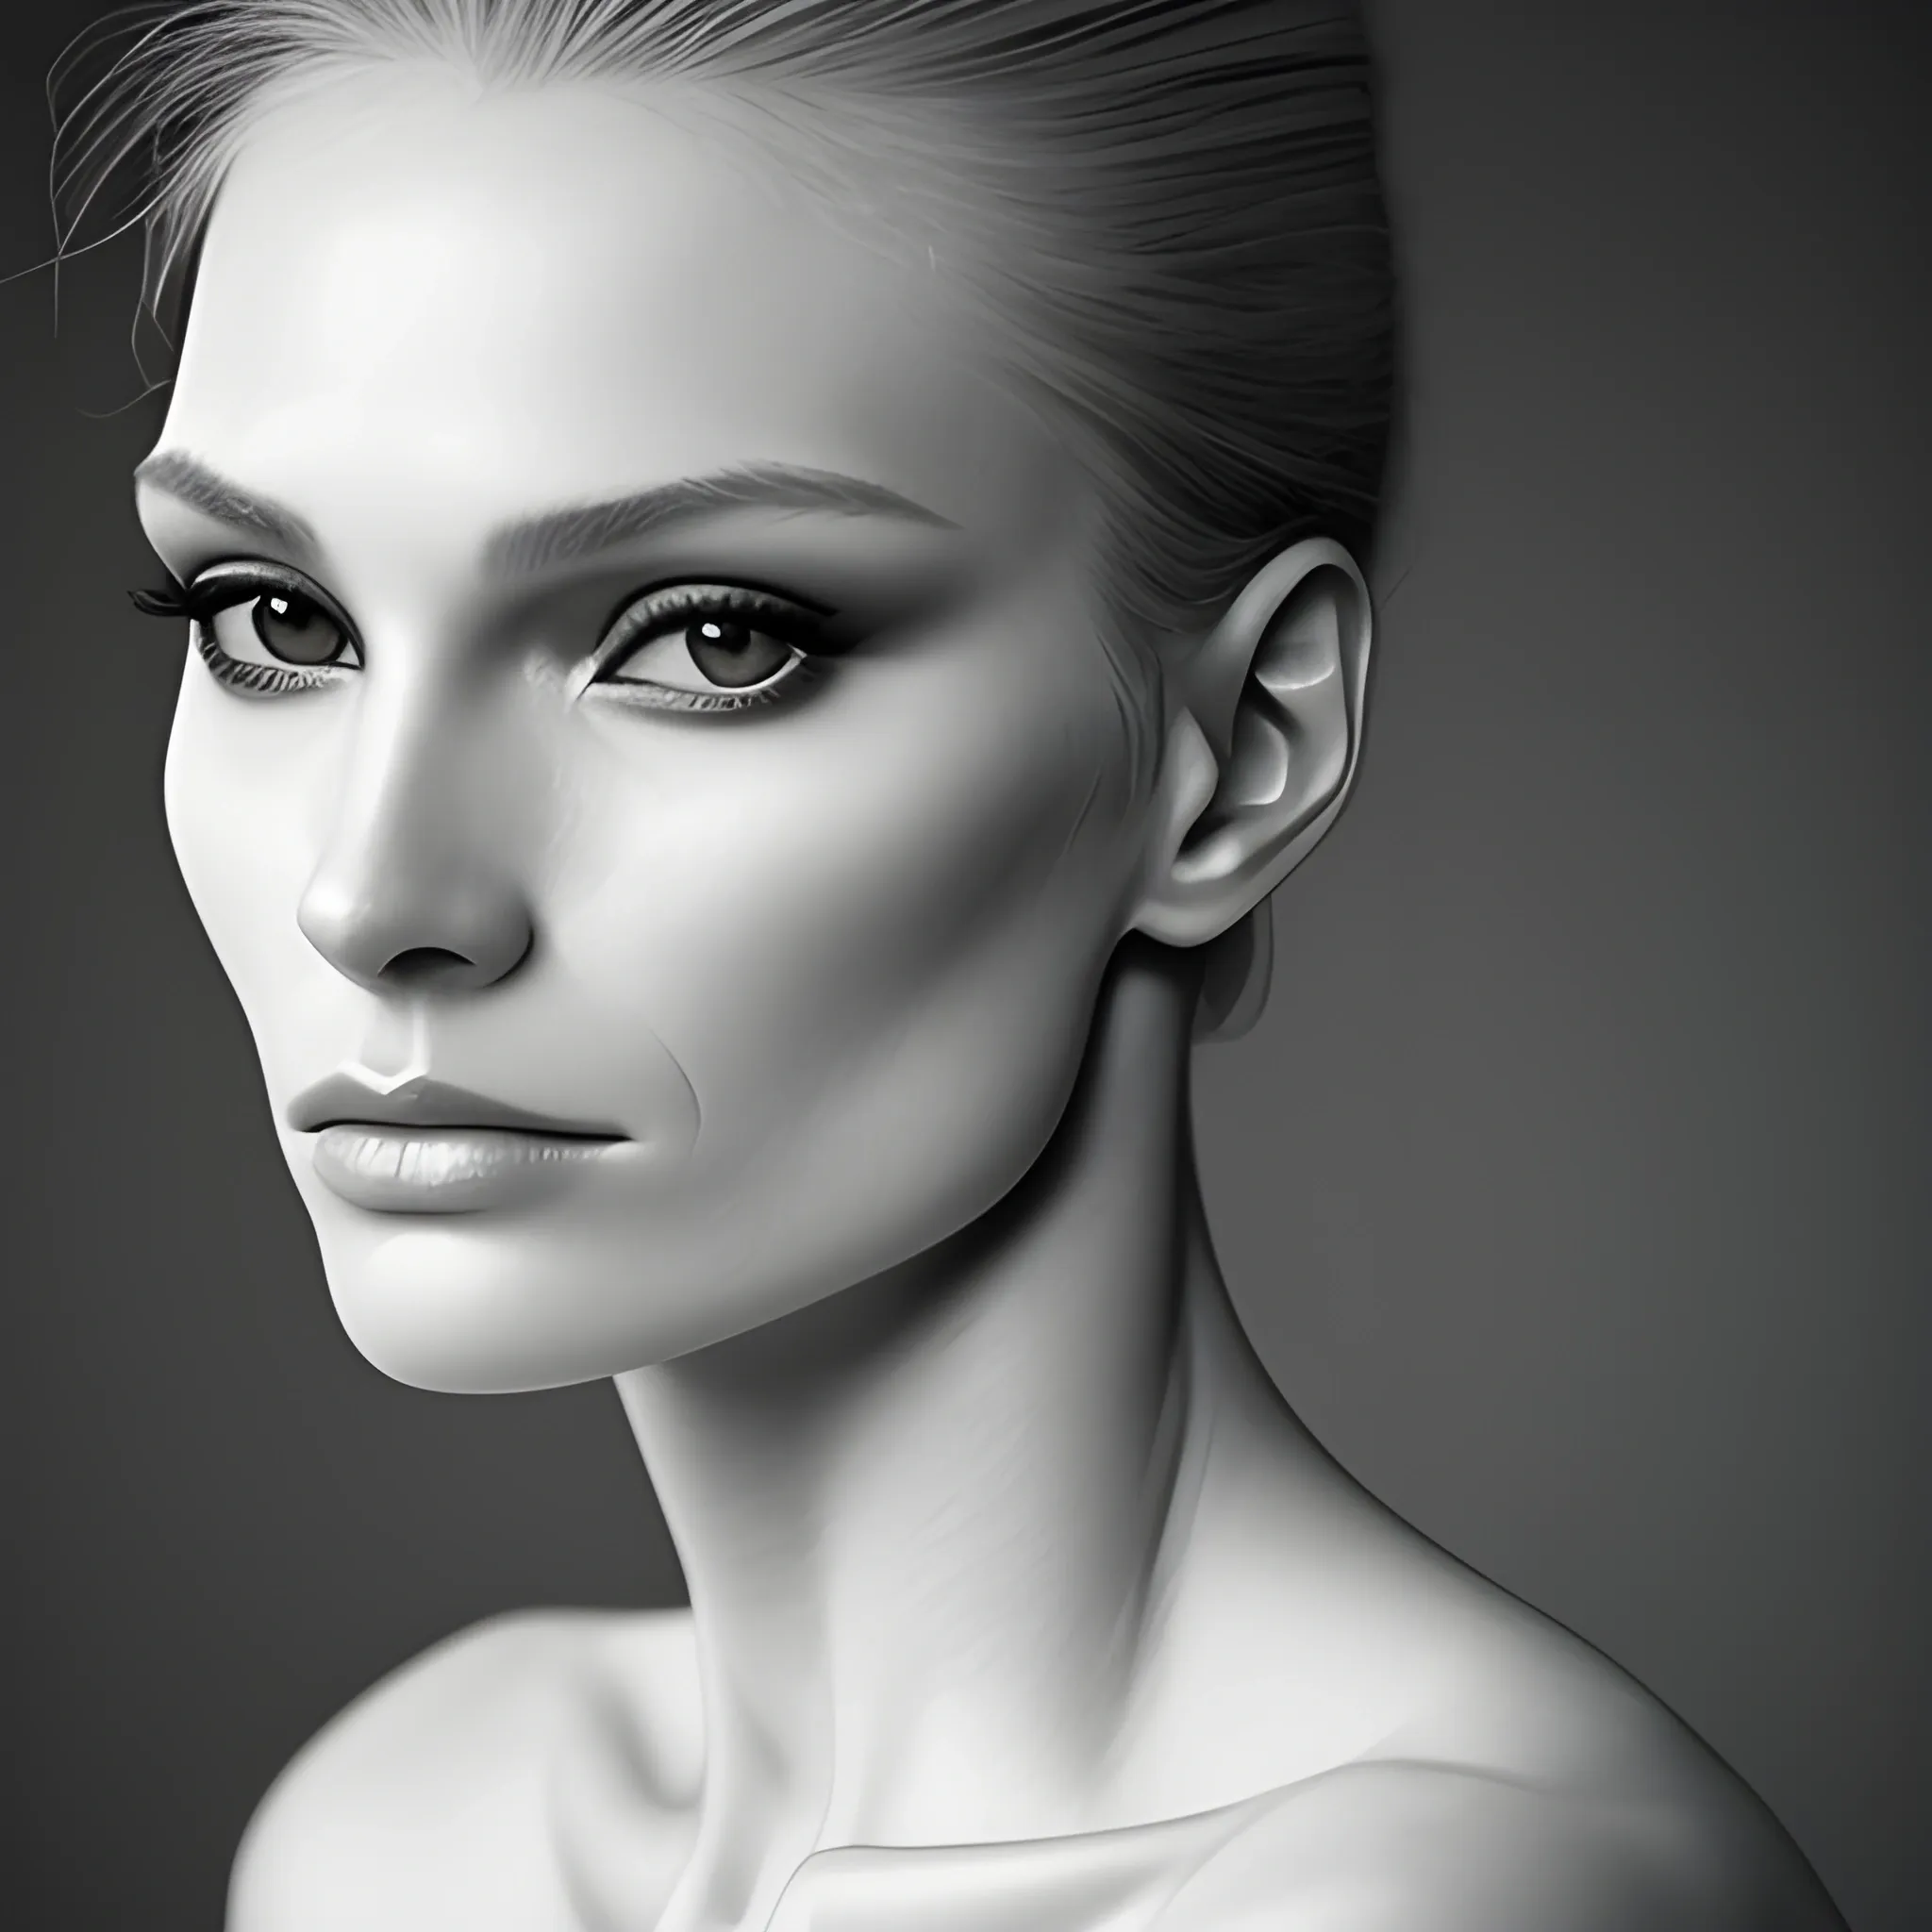 A glamour shot focusing on her cheekbones and jawline, using shallow depth of field and diffused lighting to highlight the softness of her features.